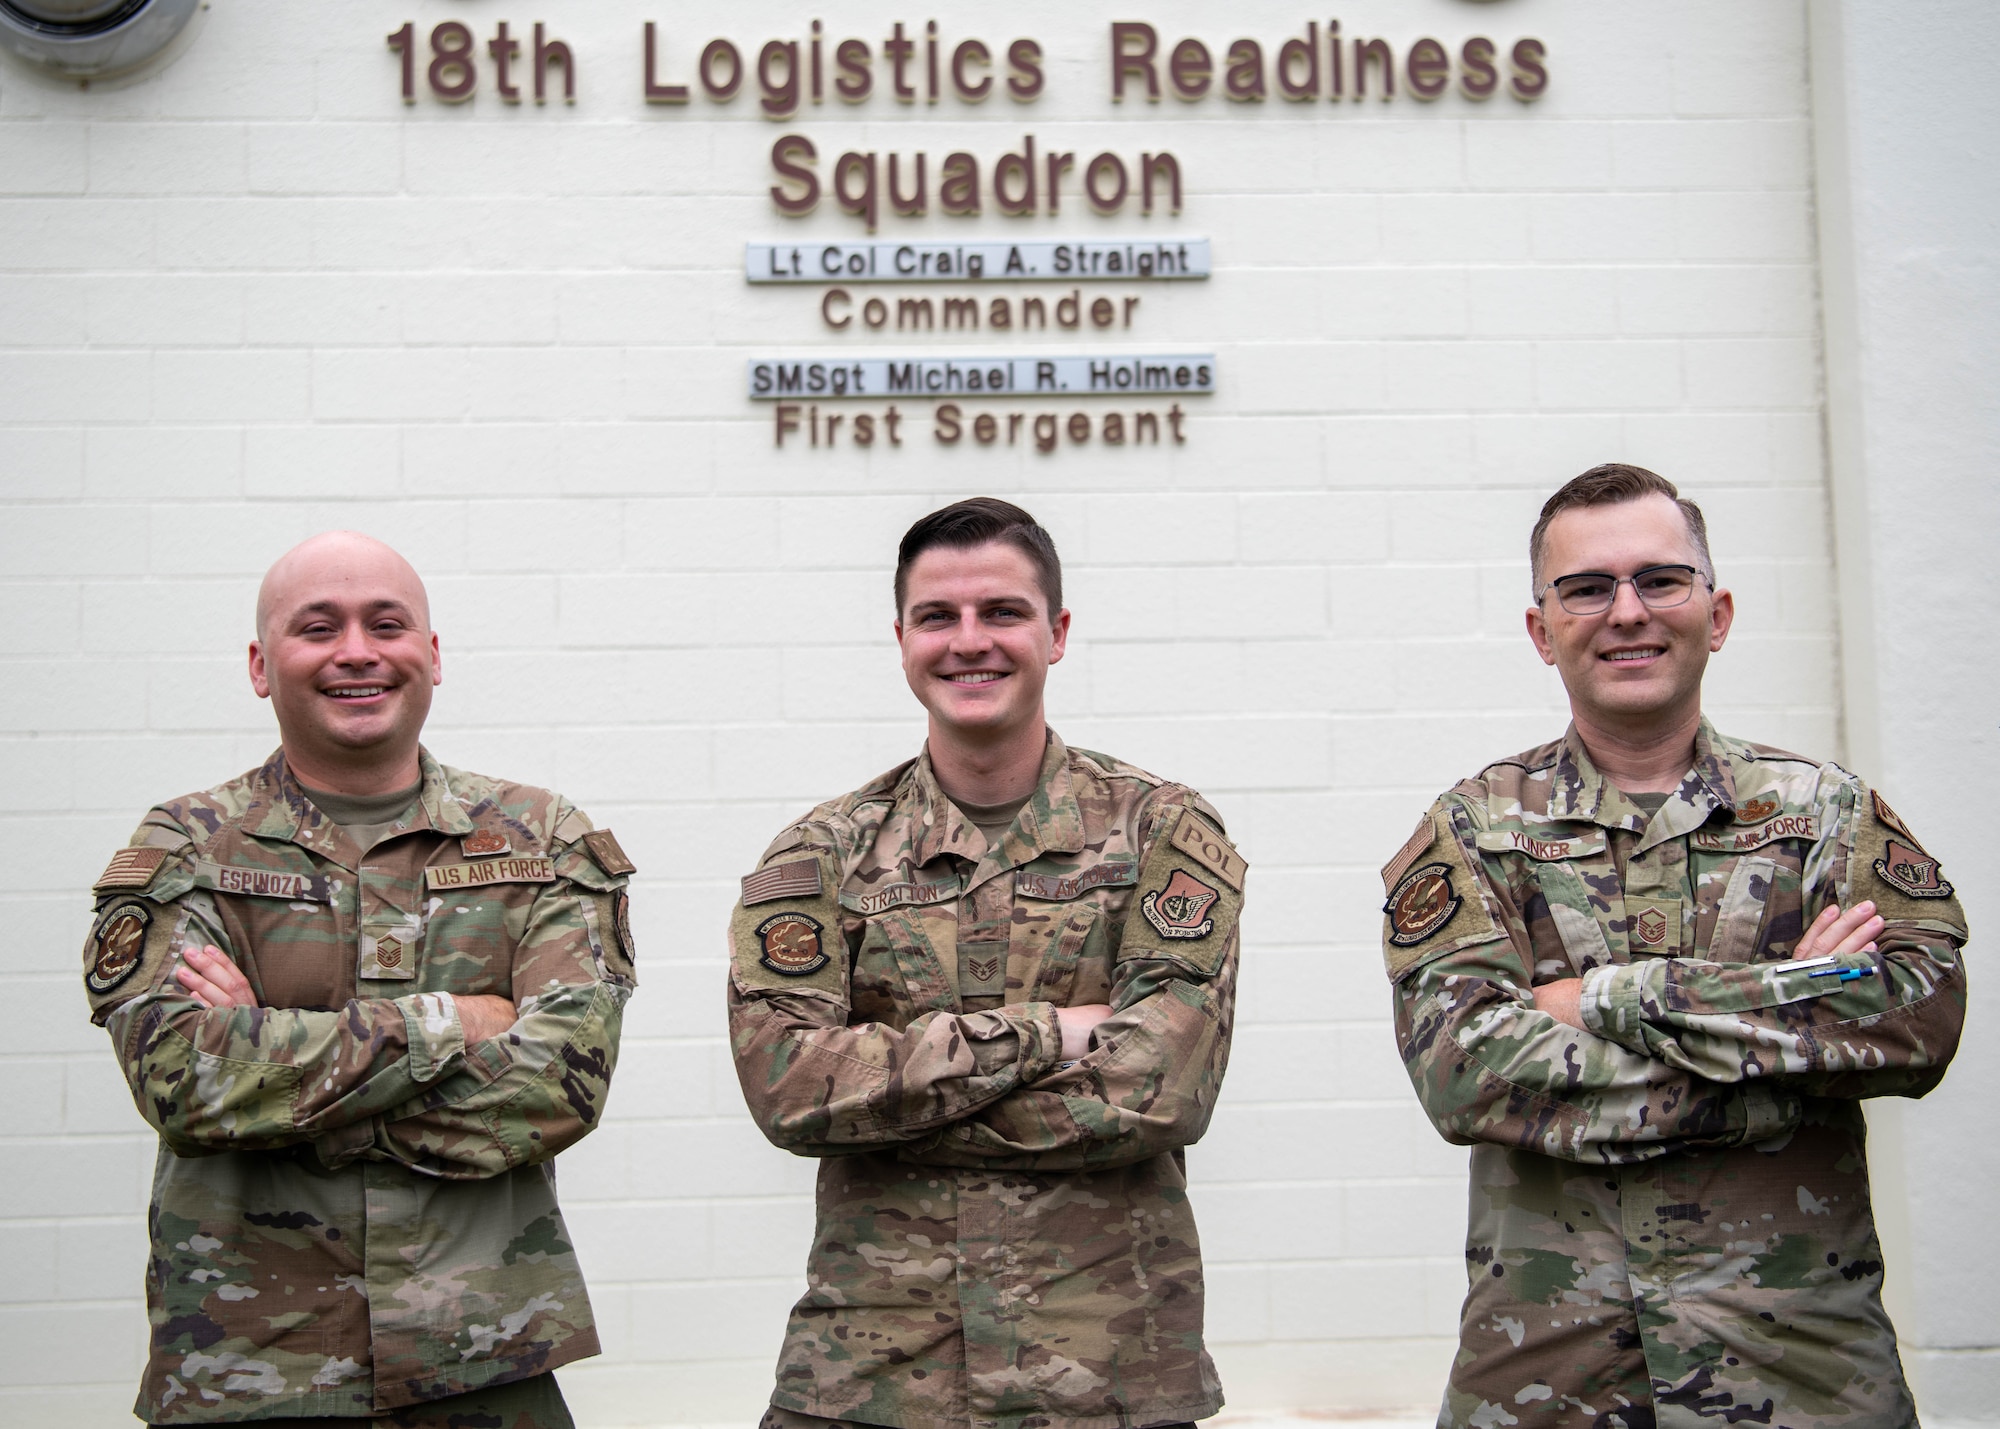 Three Airmen pose for a photo